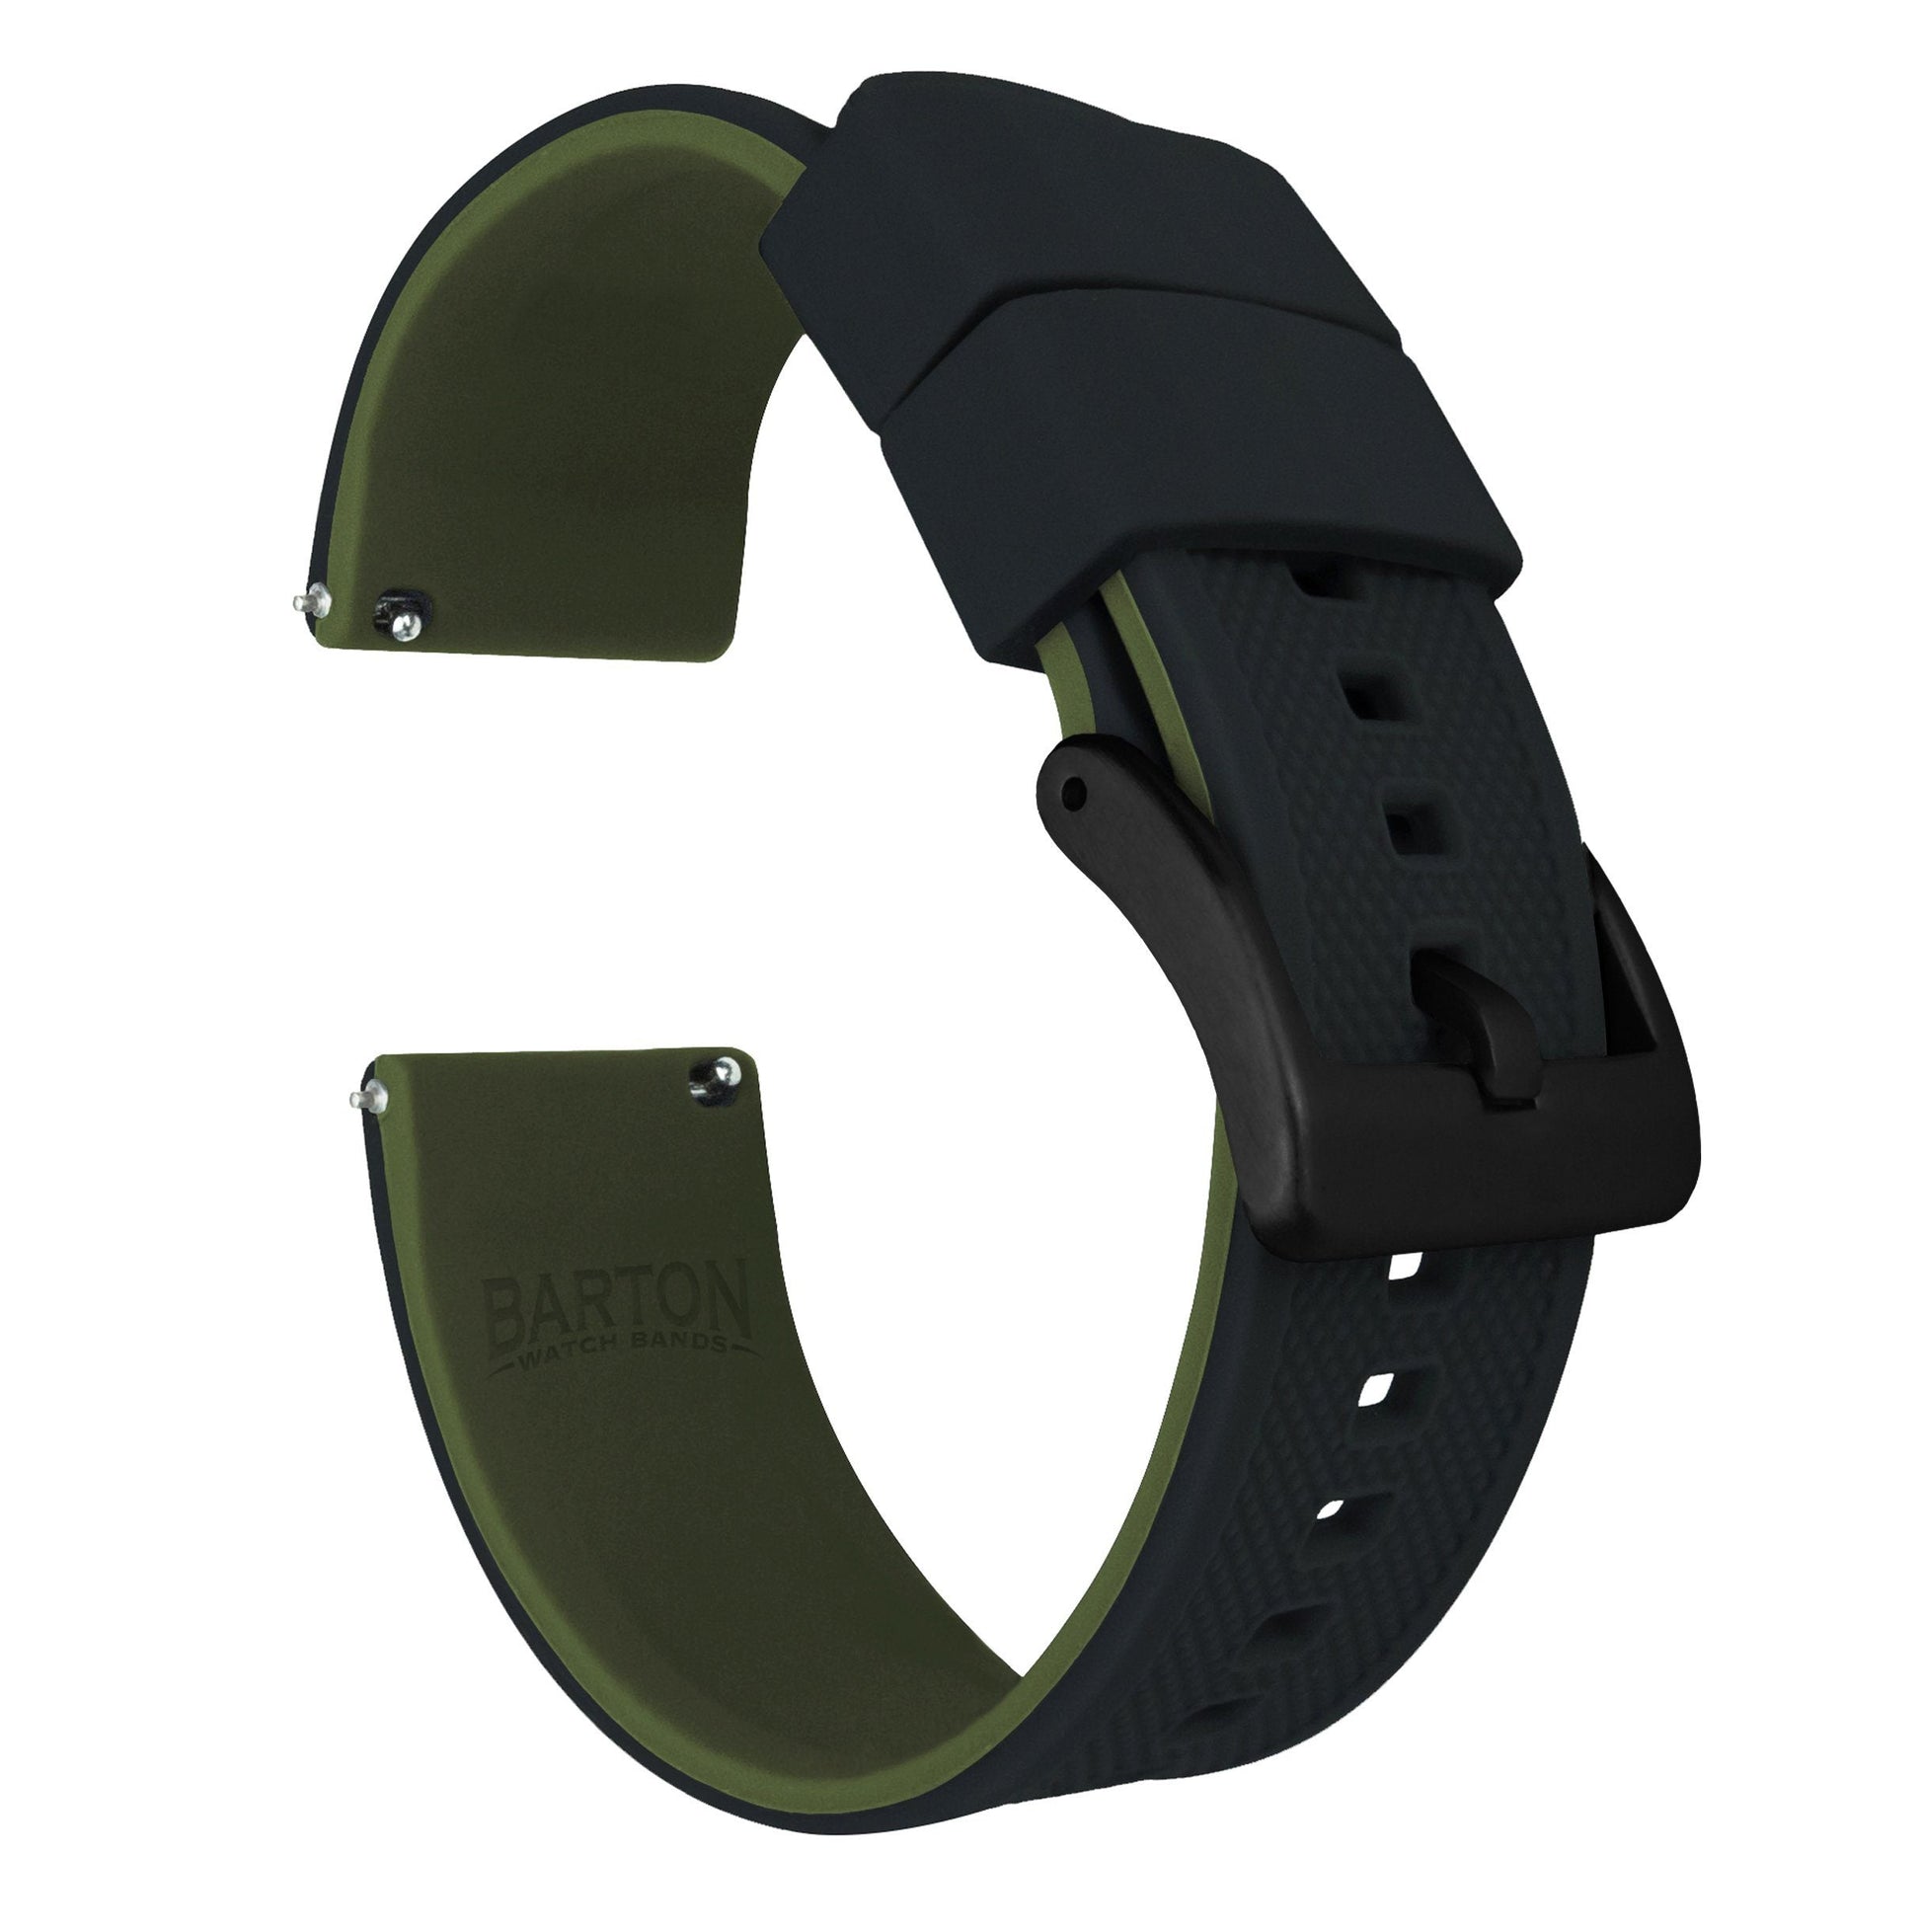 MOONSWATCH Bip | Elite Silicone | Black Top / Army Green Bottom - Barton Watch Bands